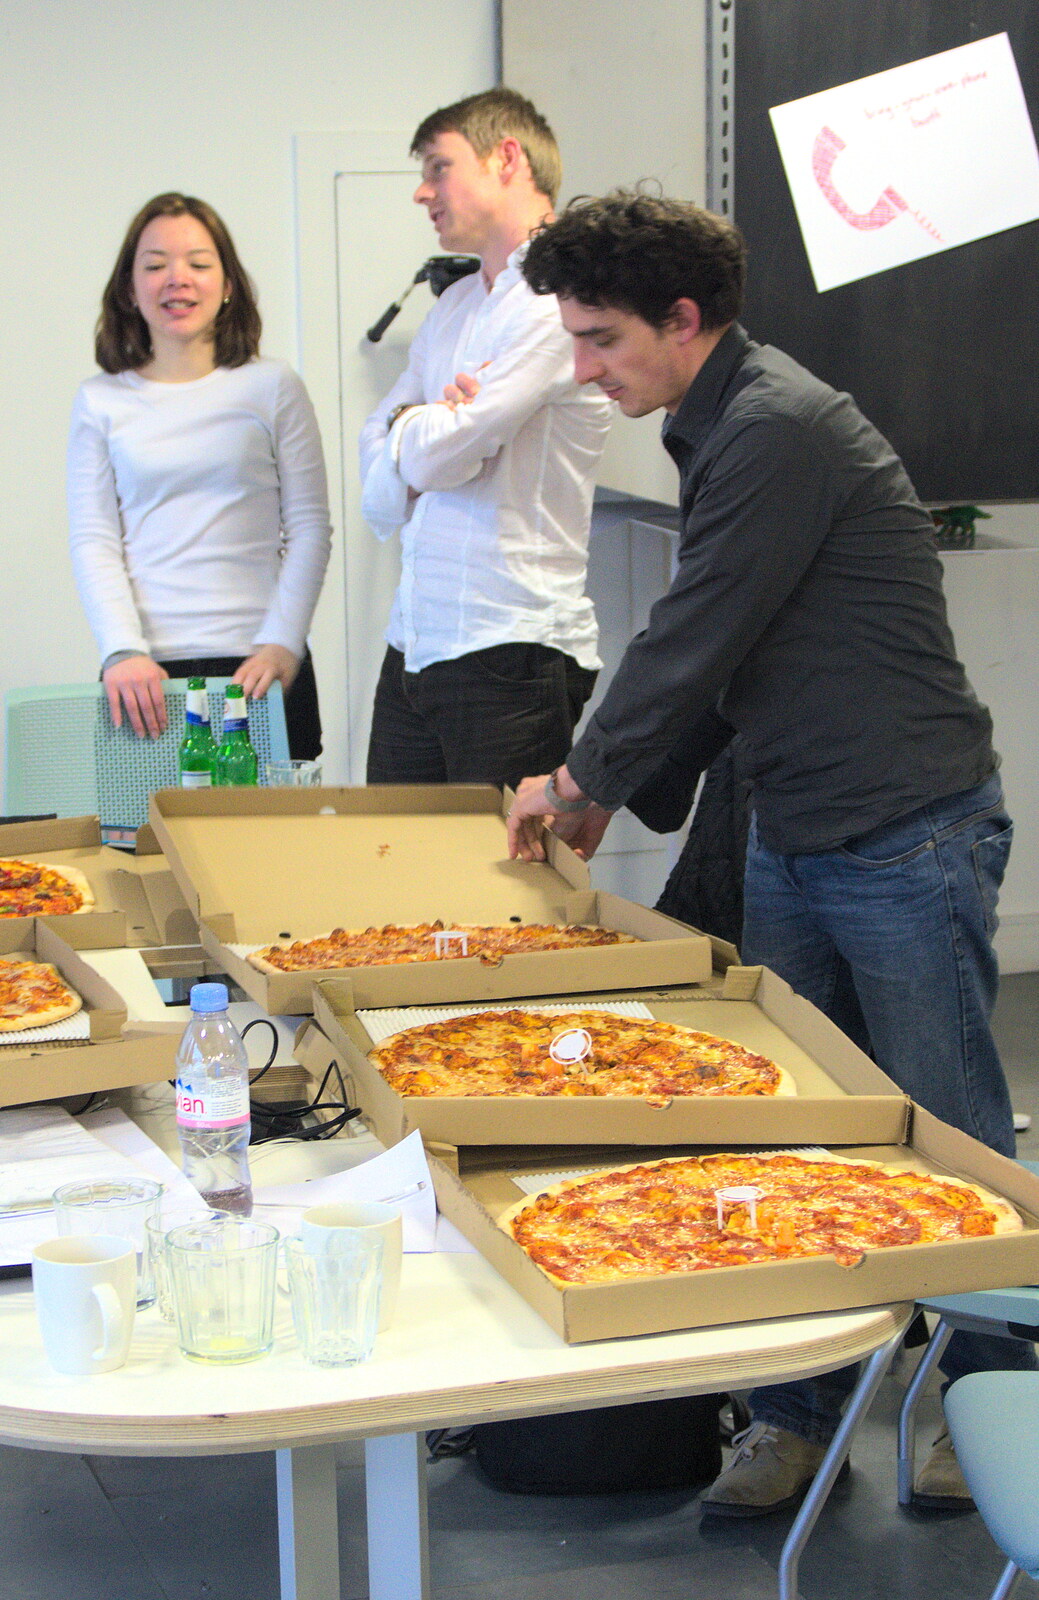 Pizzas are ready for the evening feed from A SwiftKey Hack Day, Westminster, London - 31st May 2013